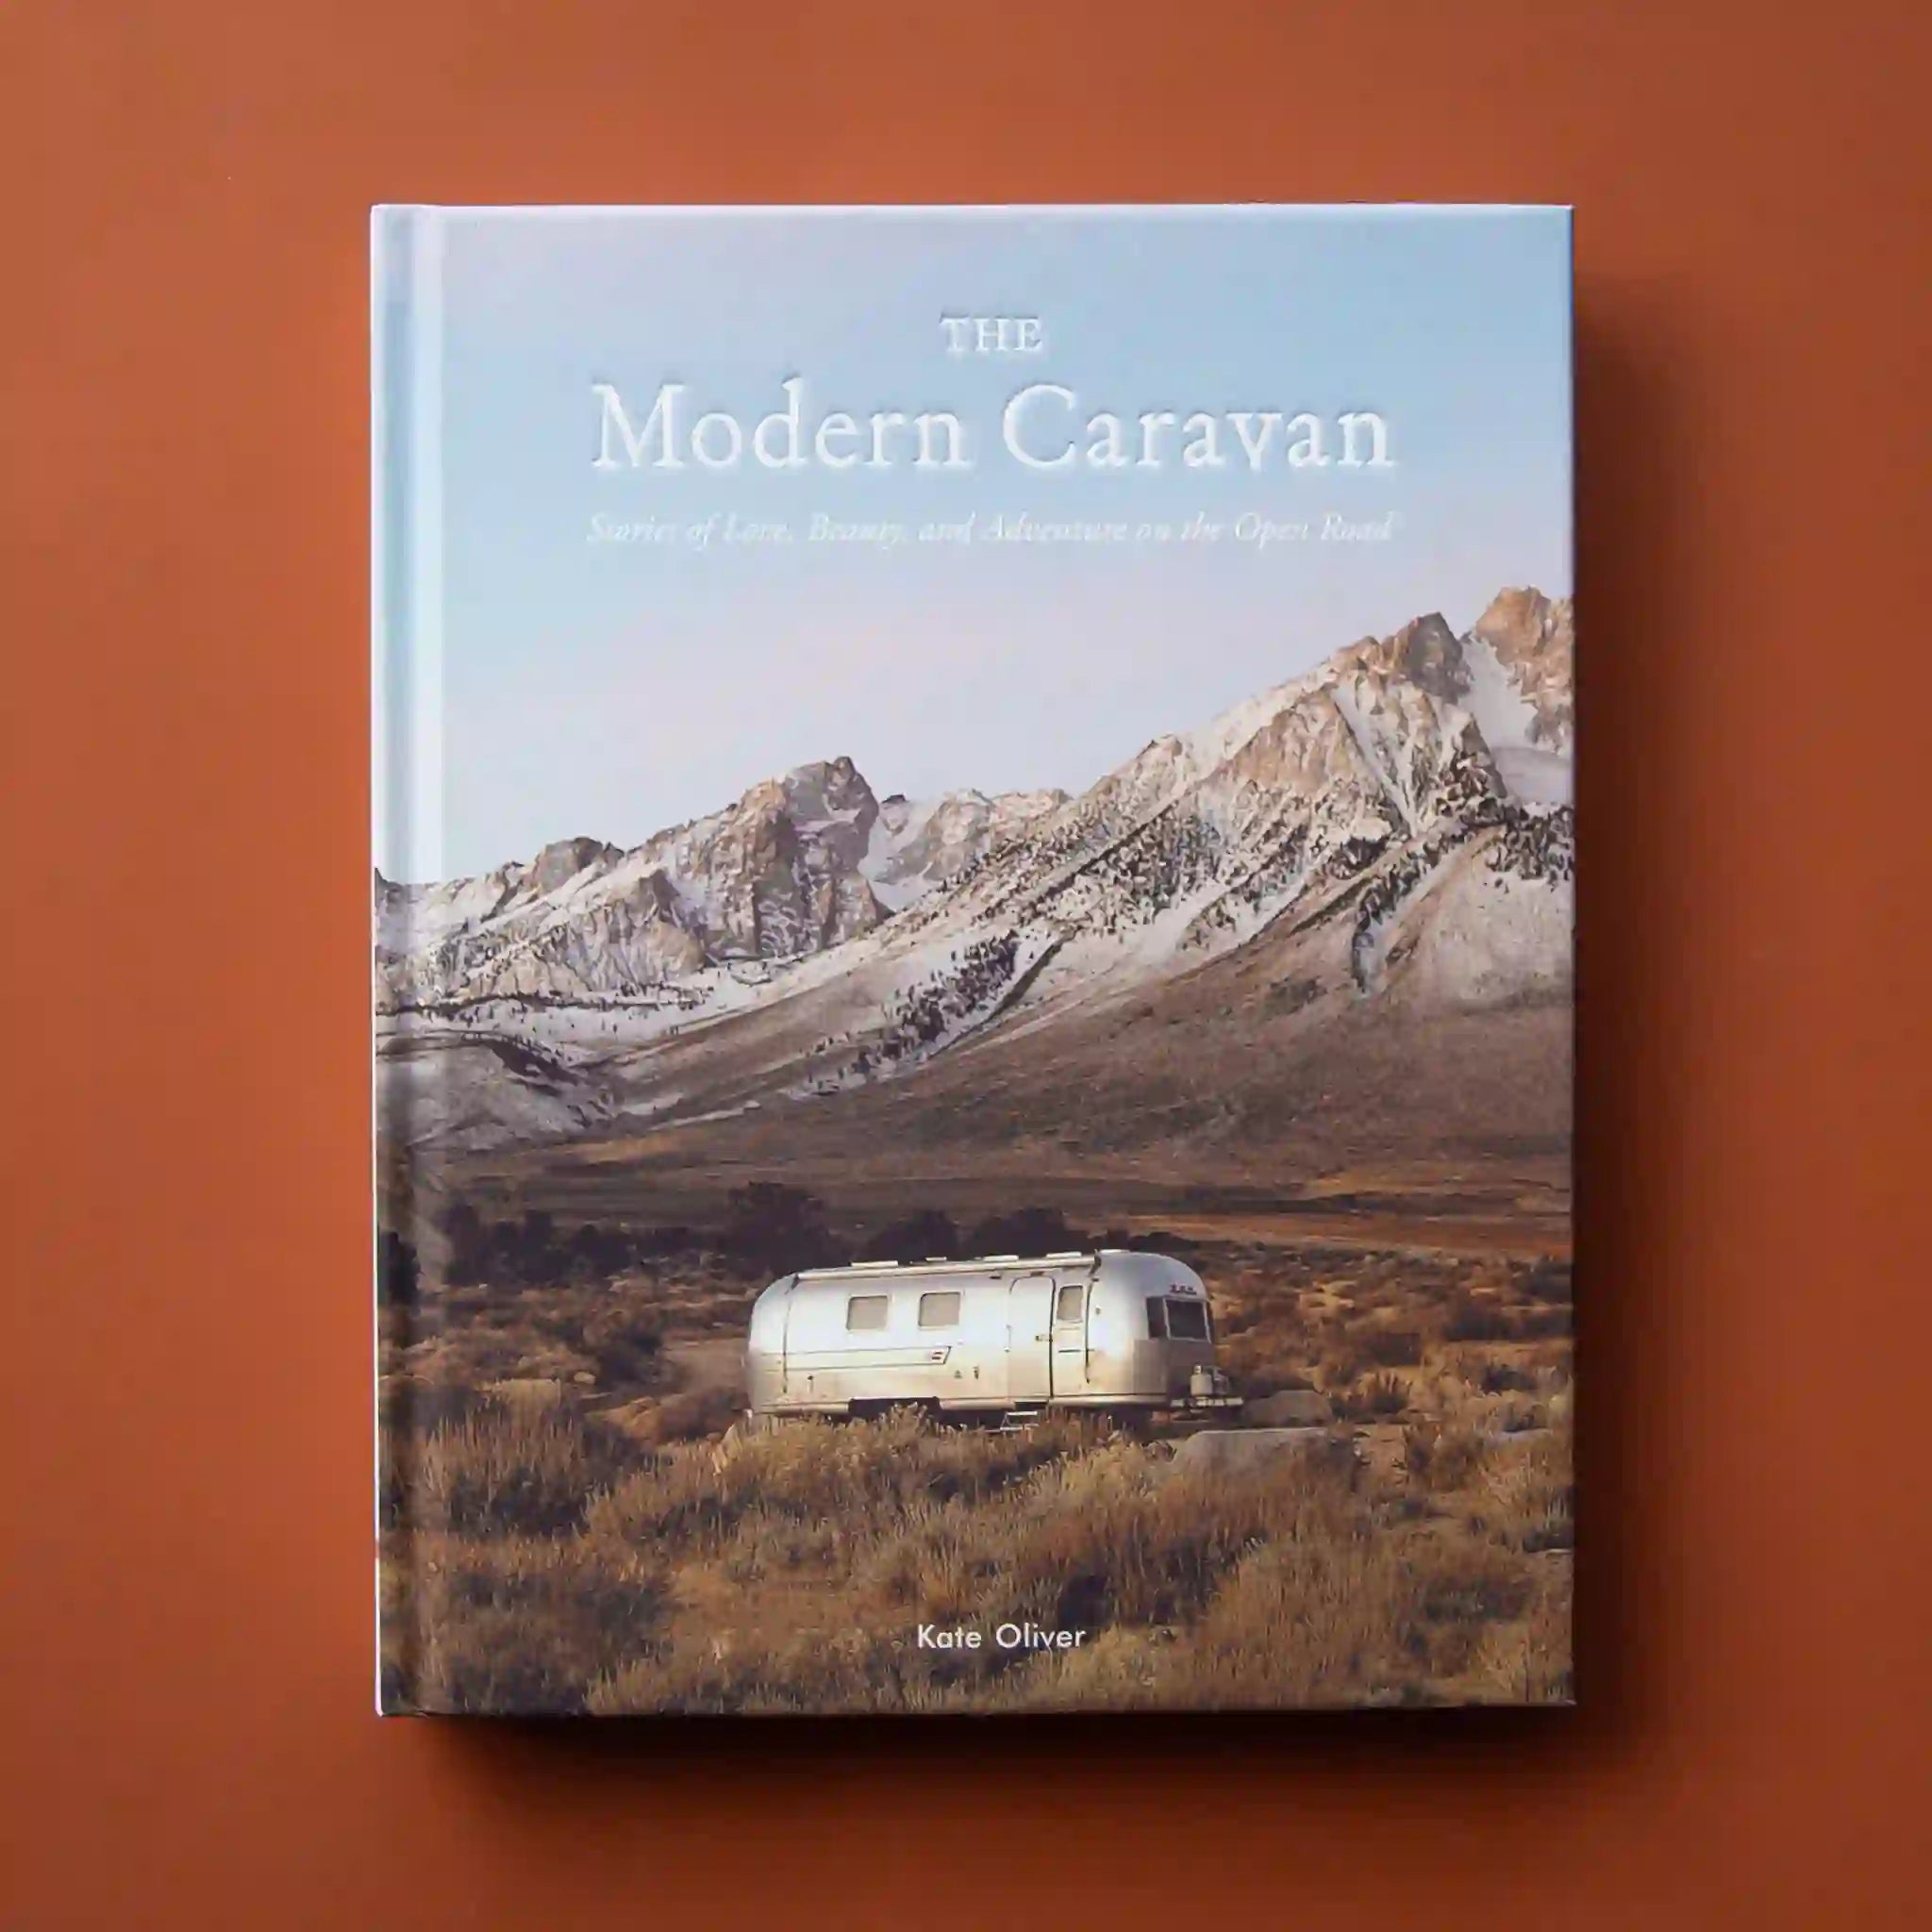 Hard cover of travel book titled 'The Modern Caravan, stories of love, beauty, and adventure on the open road' in white pressed lettering. Behind the title is a cool toned mountain scene. Below the mountains sits a silver airstream trailer amidst an open valley.